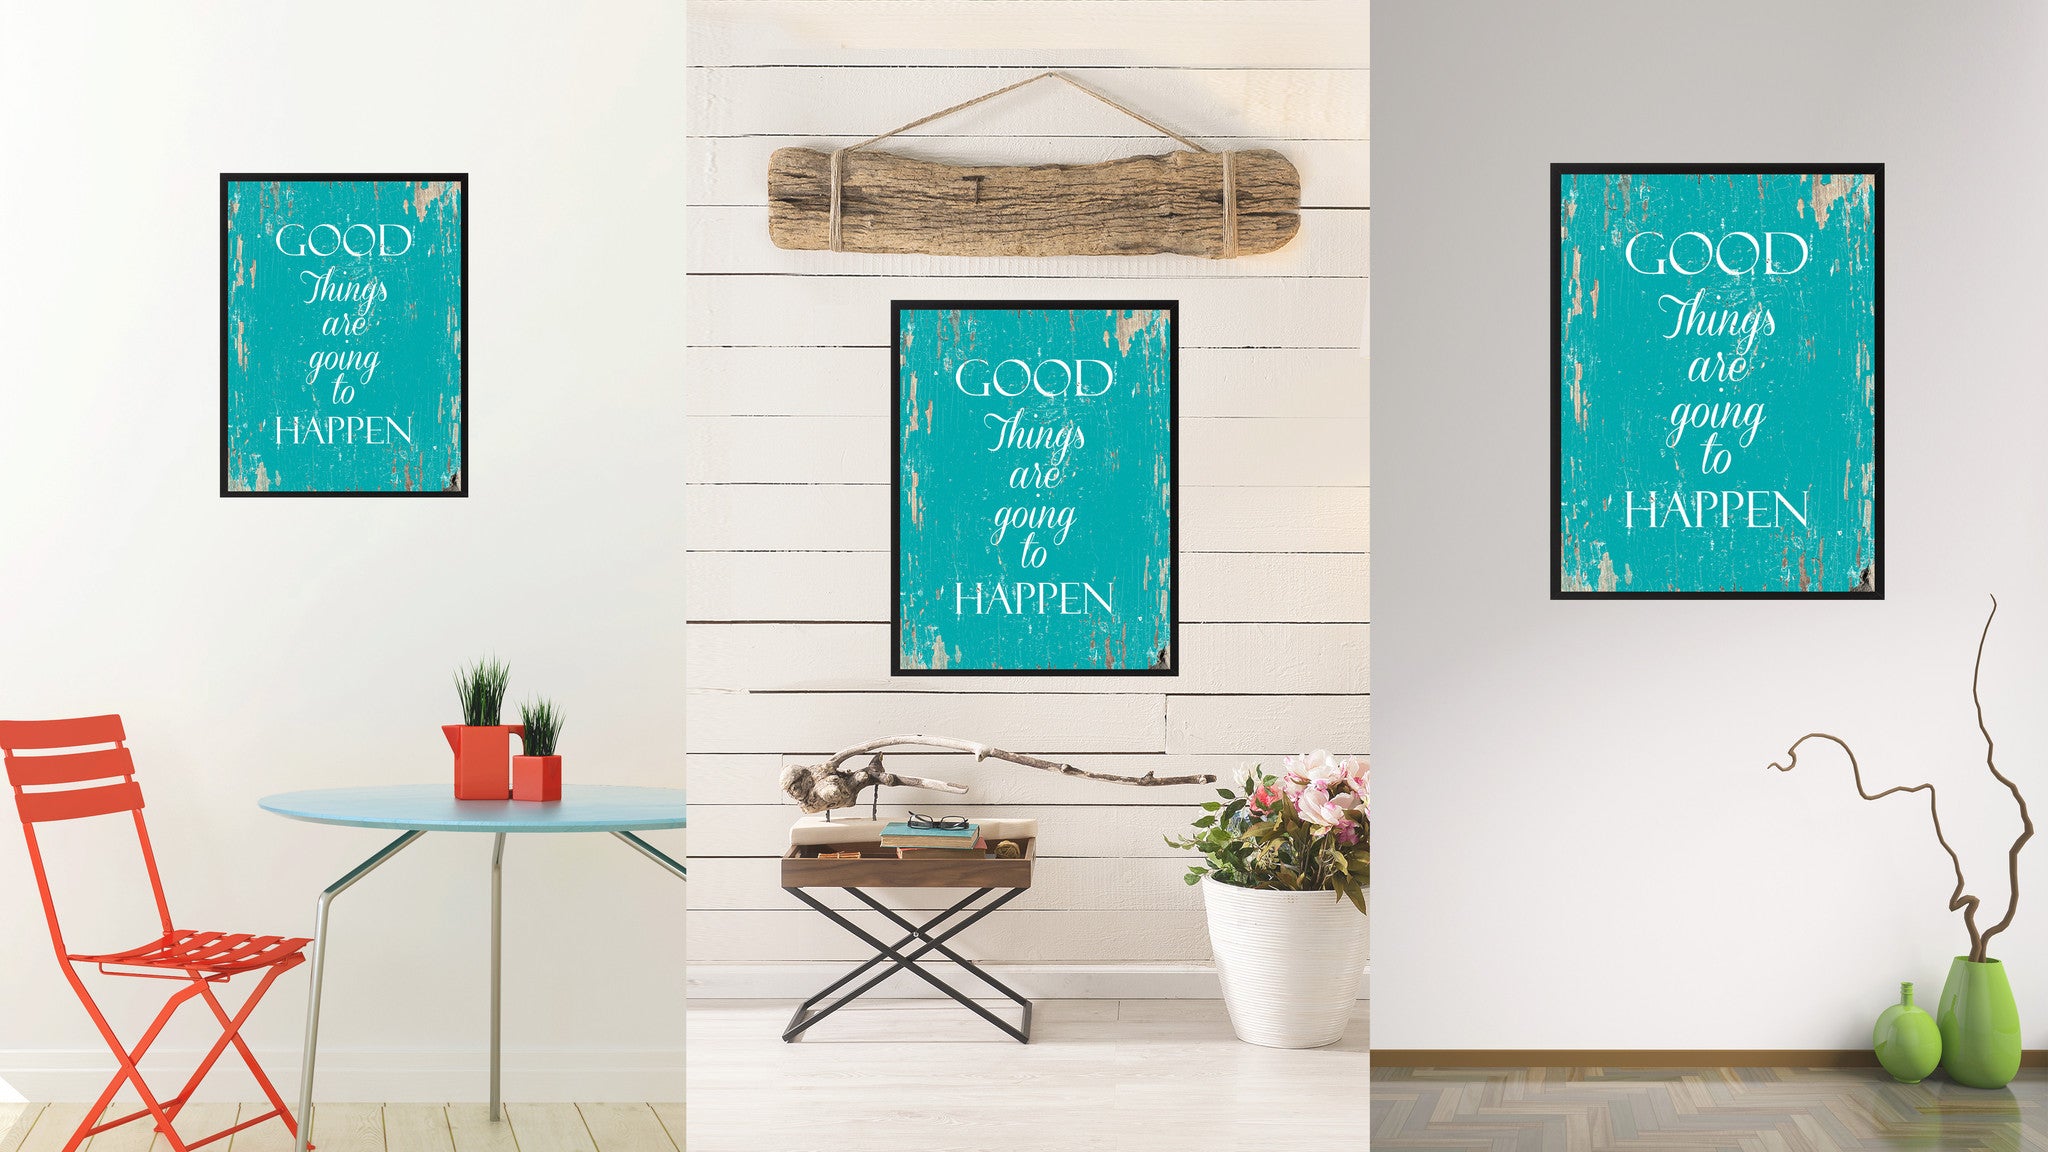 Good things are going to happen Motivation Quote Saying Gift Ideas Home Decor Wall Art